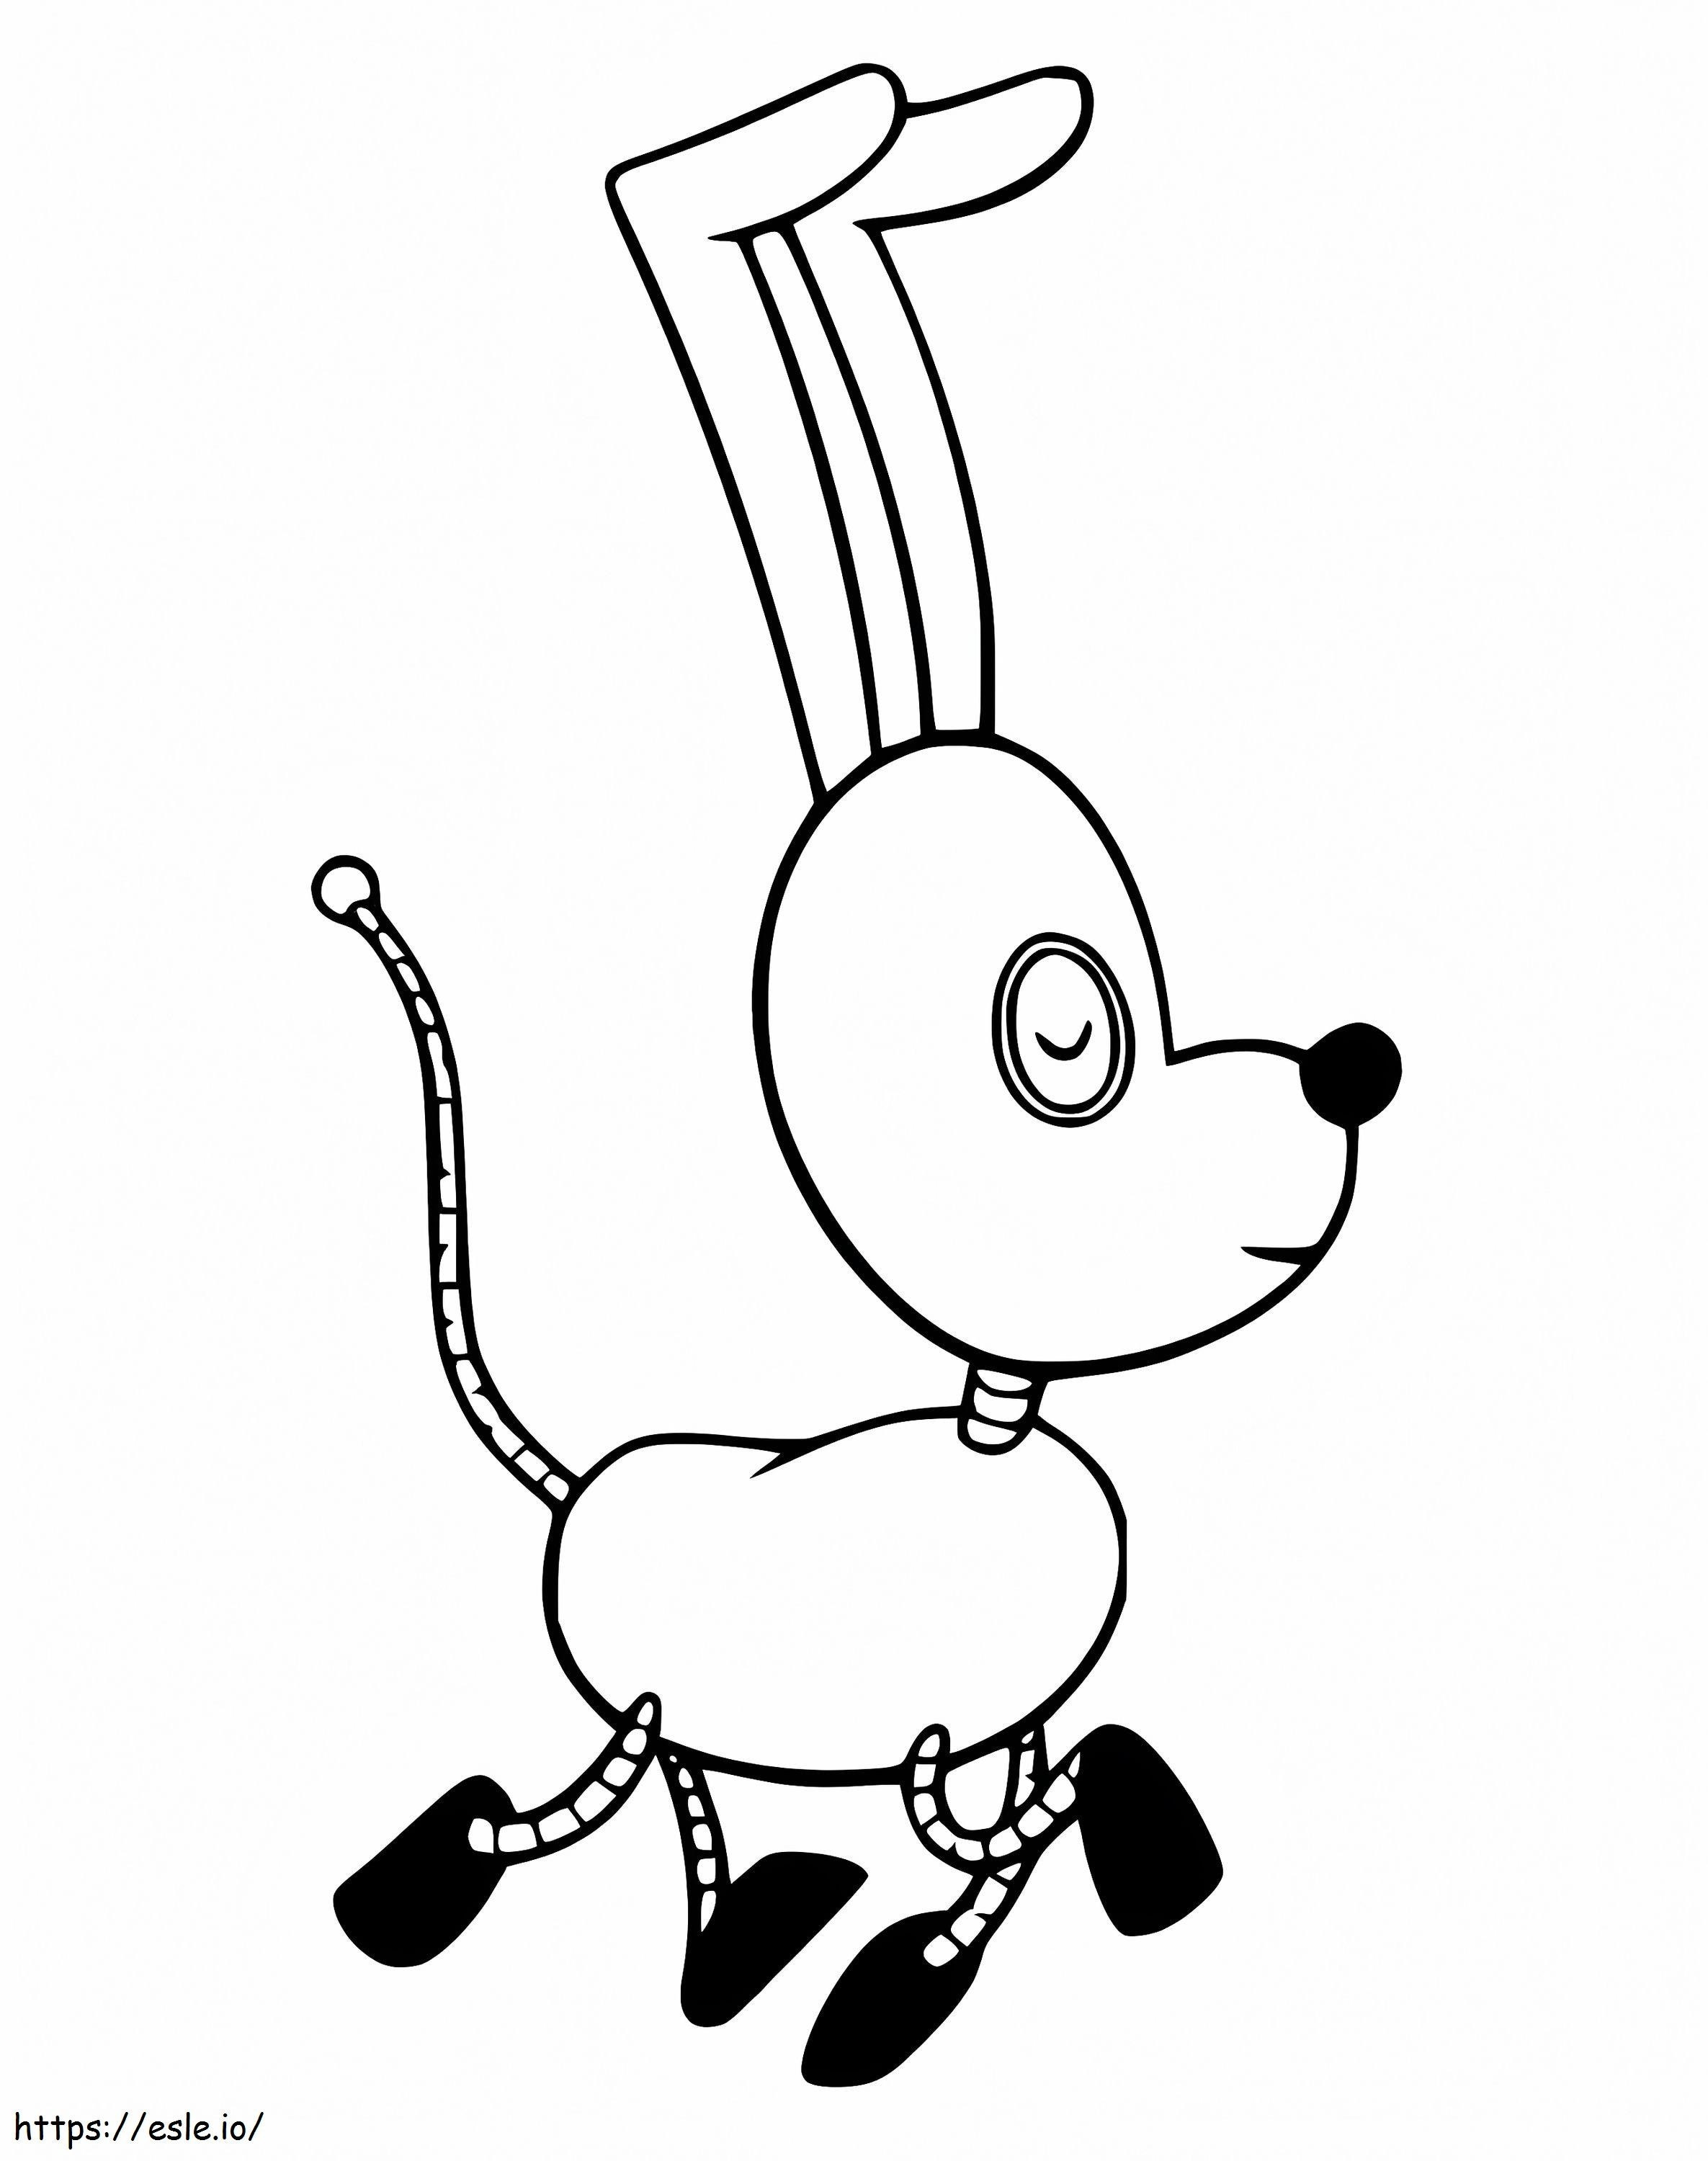 Spot Dog From Rolie Polie Olie coloring page